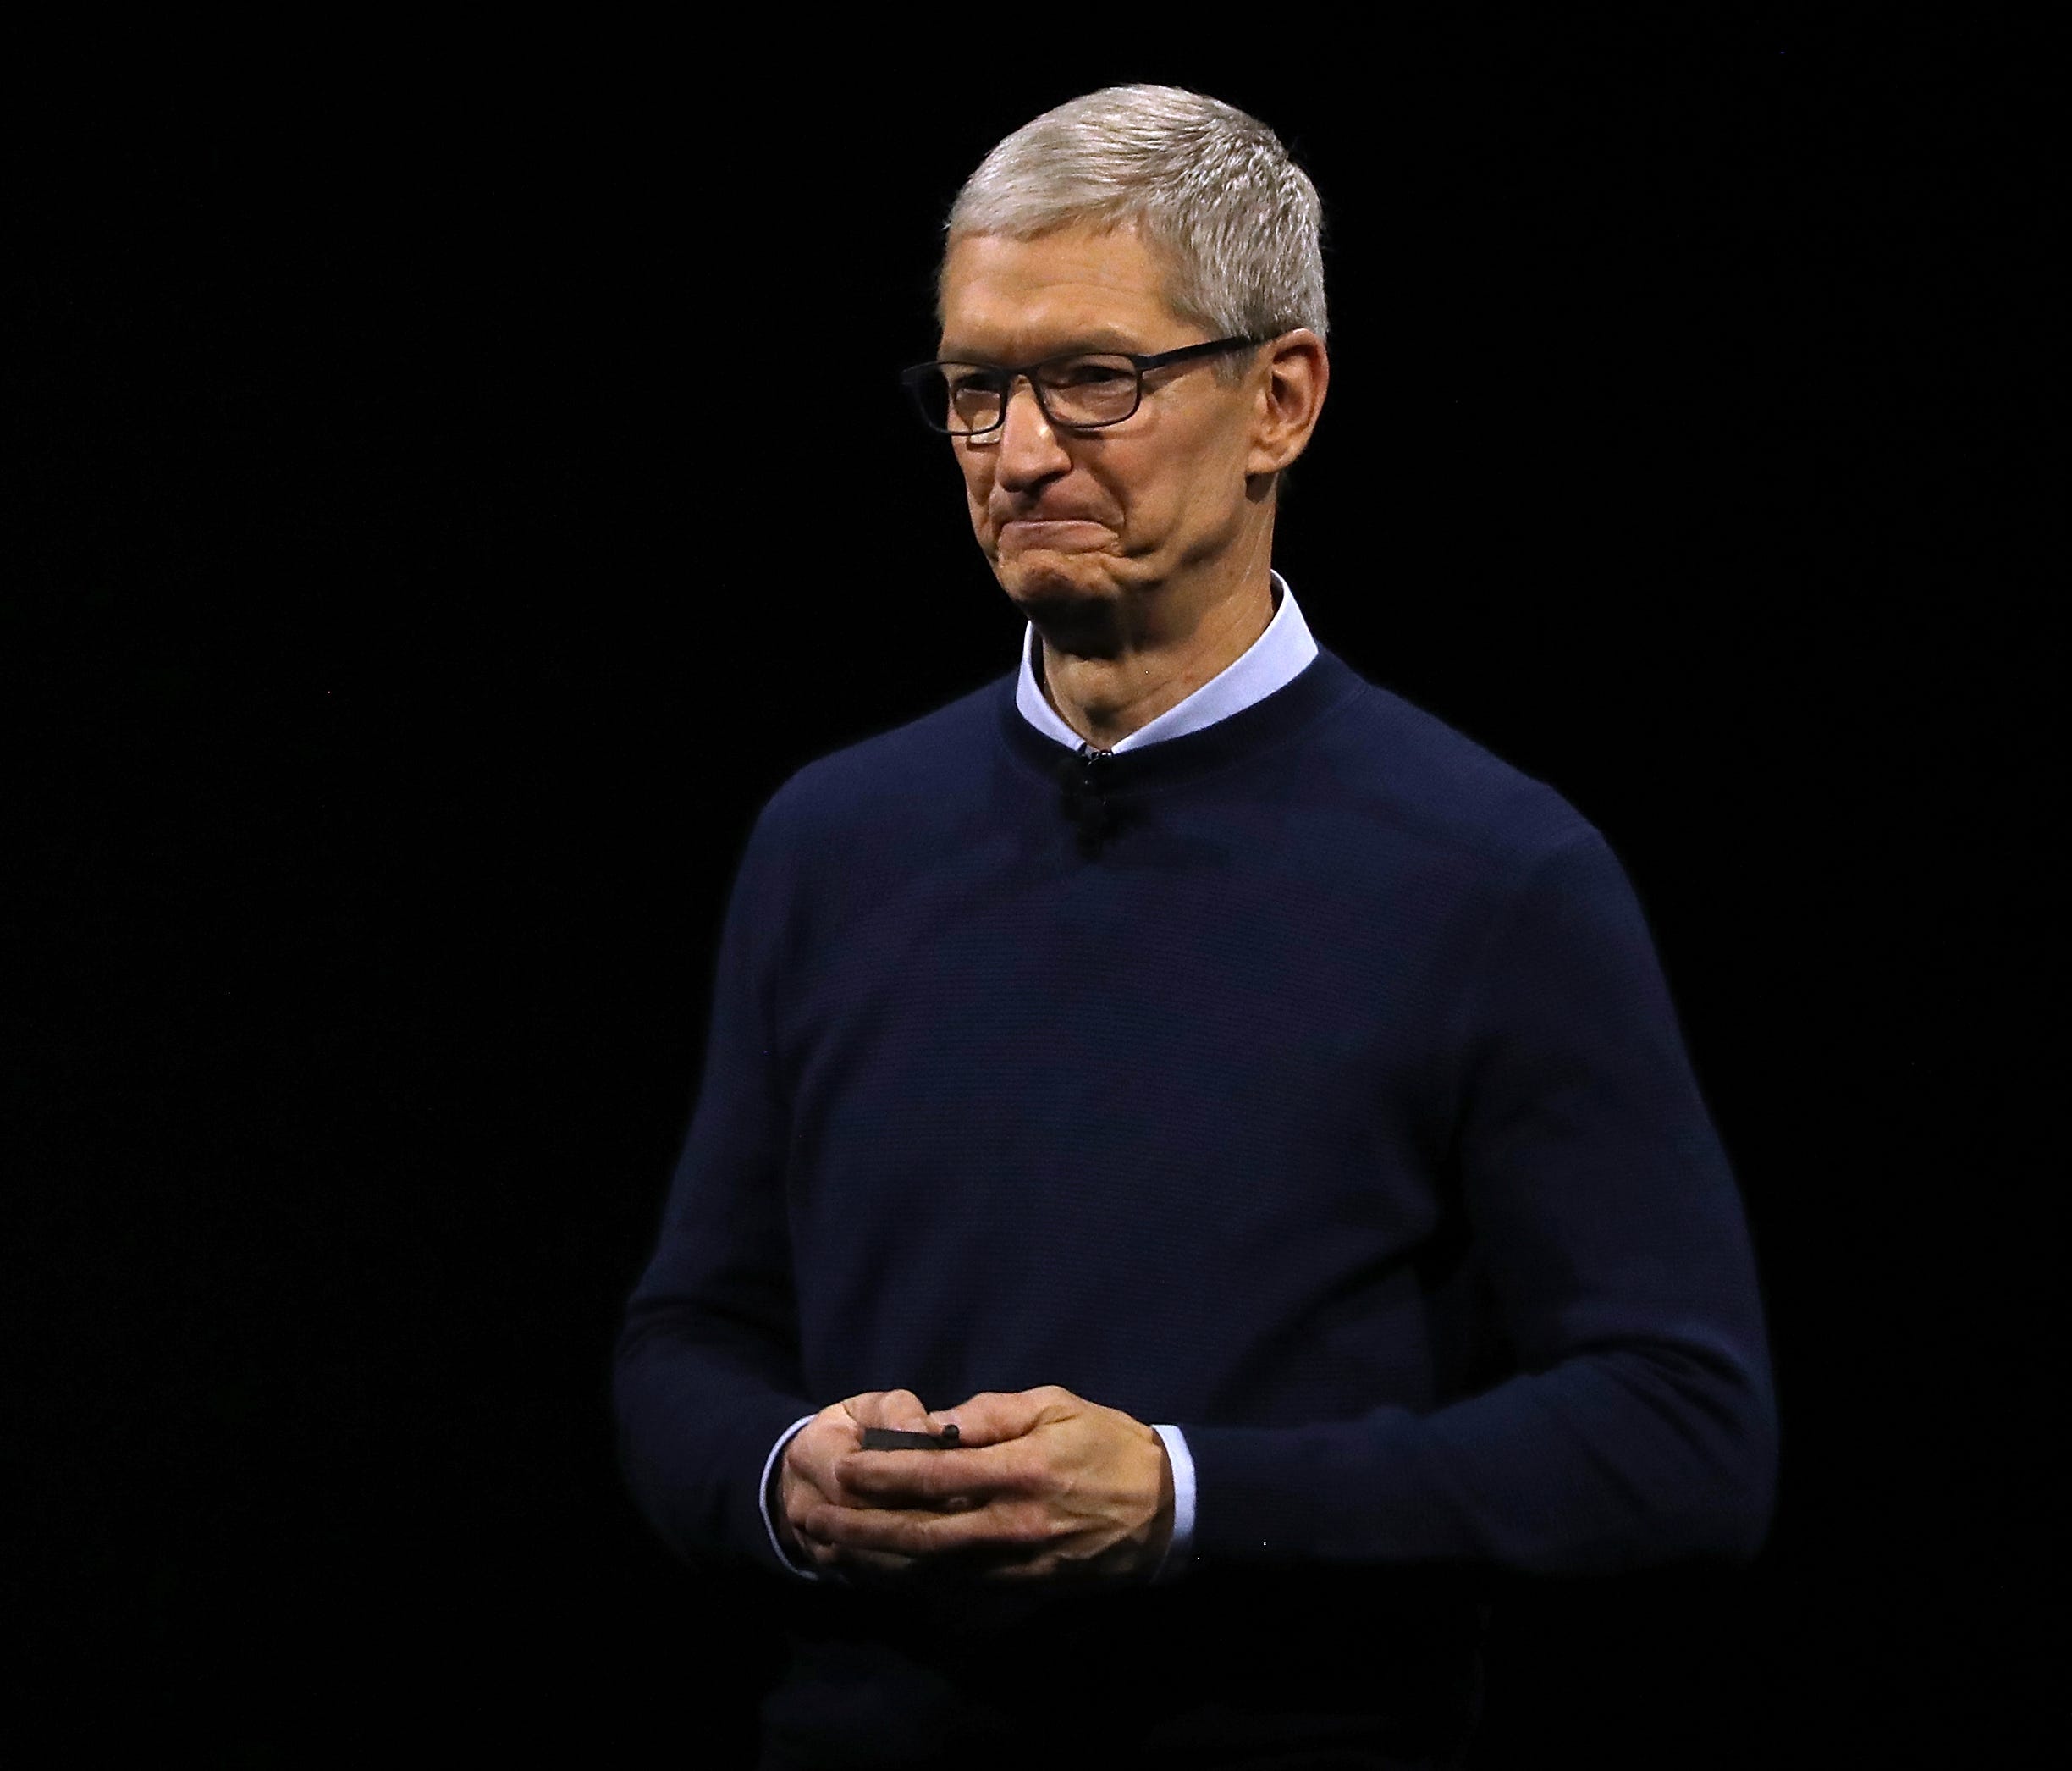 Apple CEO Tim Cook delivers the opening keynote address the 2017 Apple Worldwide Developer Conference (WWDC) at the San Jose Convention Center on June 5, 2017 in San Jose, California.